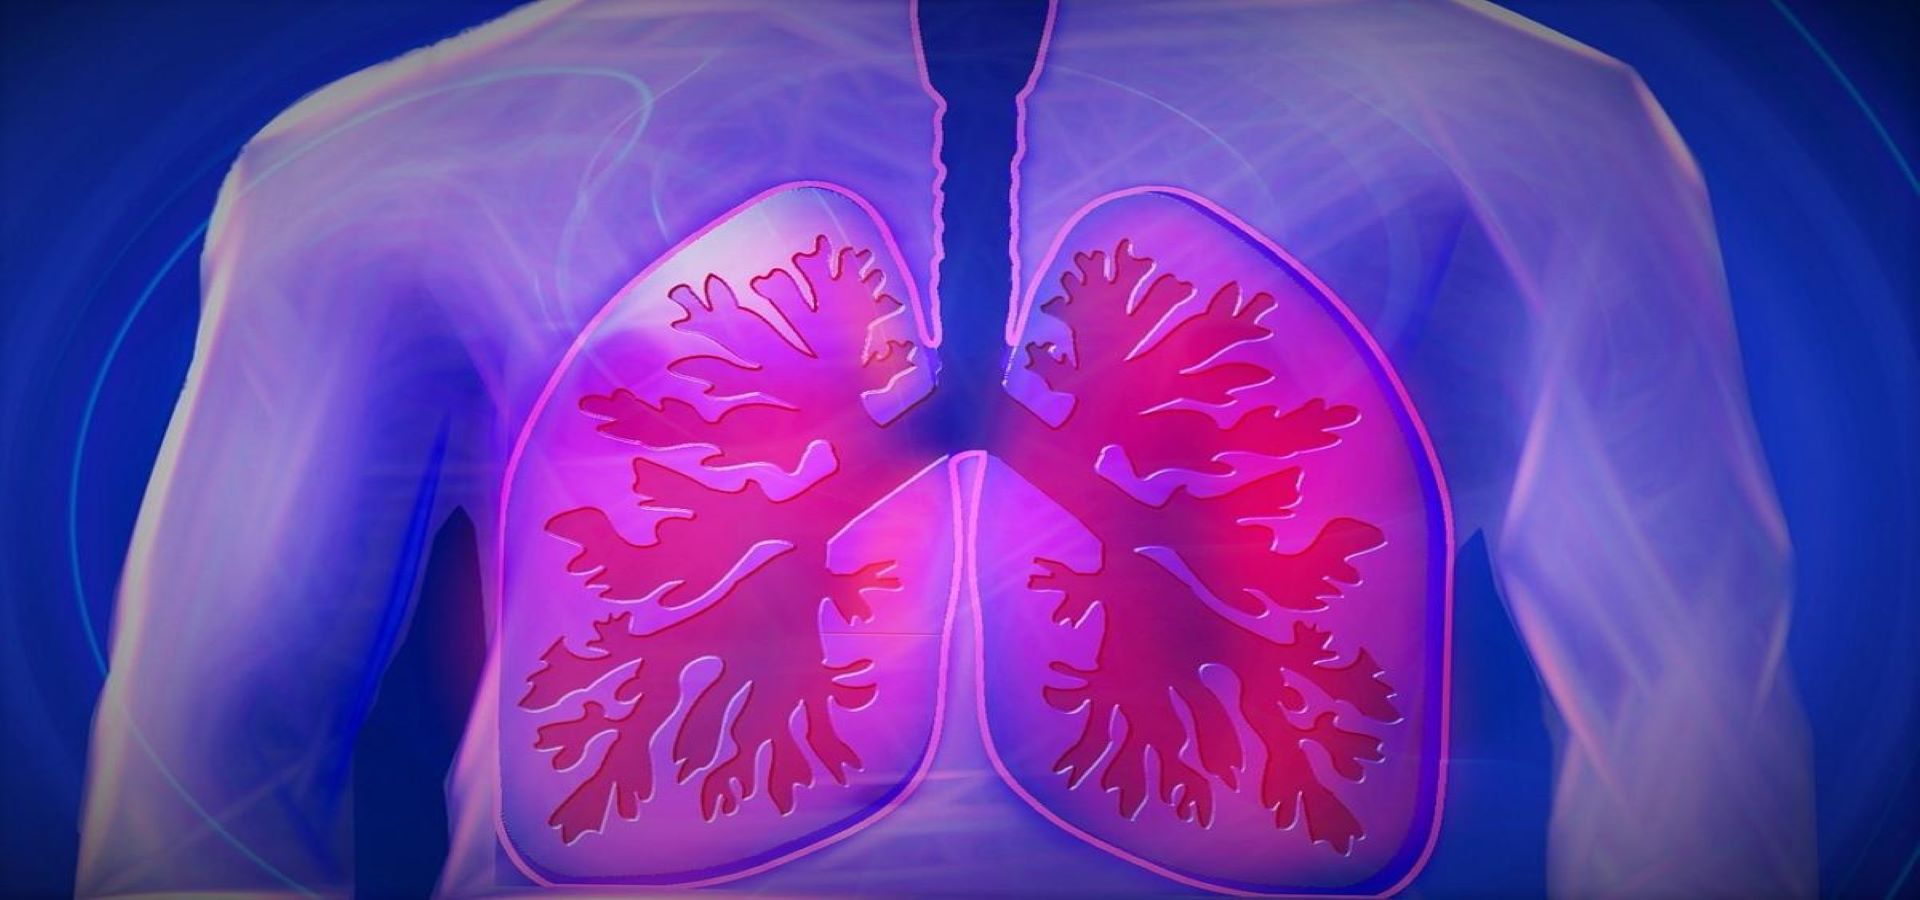 Socio-economic conditions influence lung function